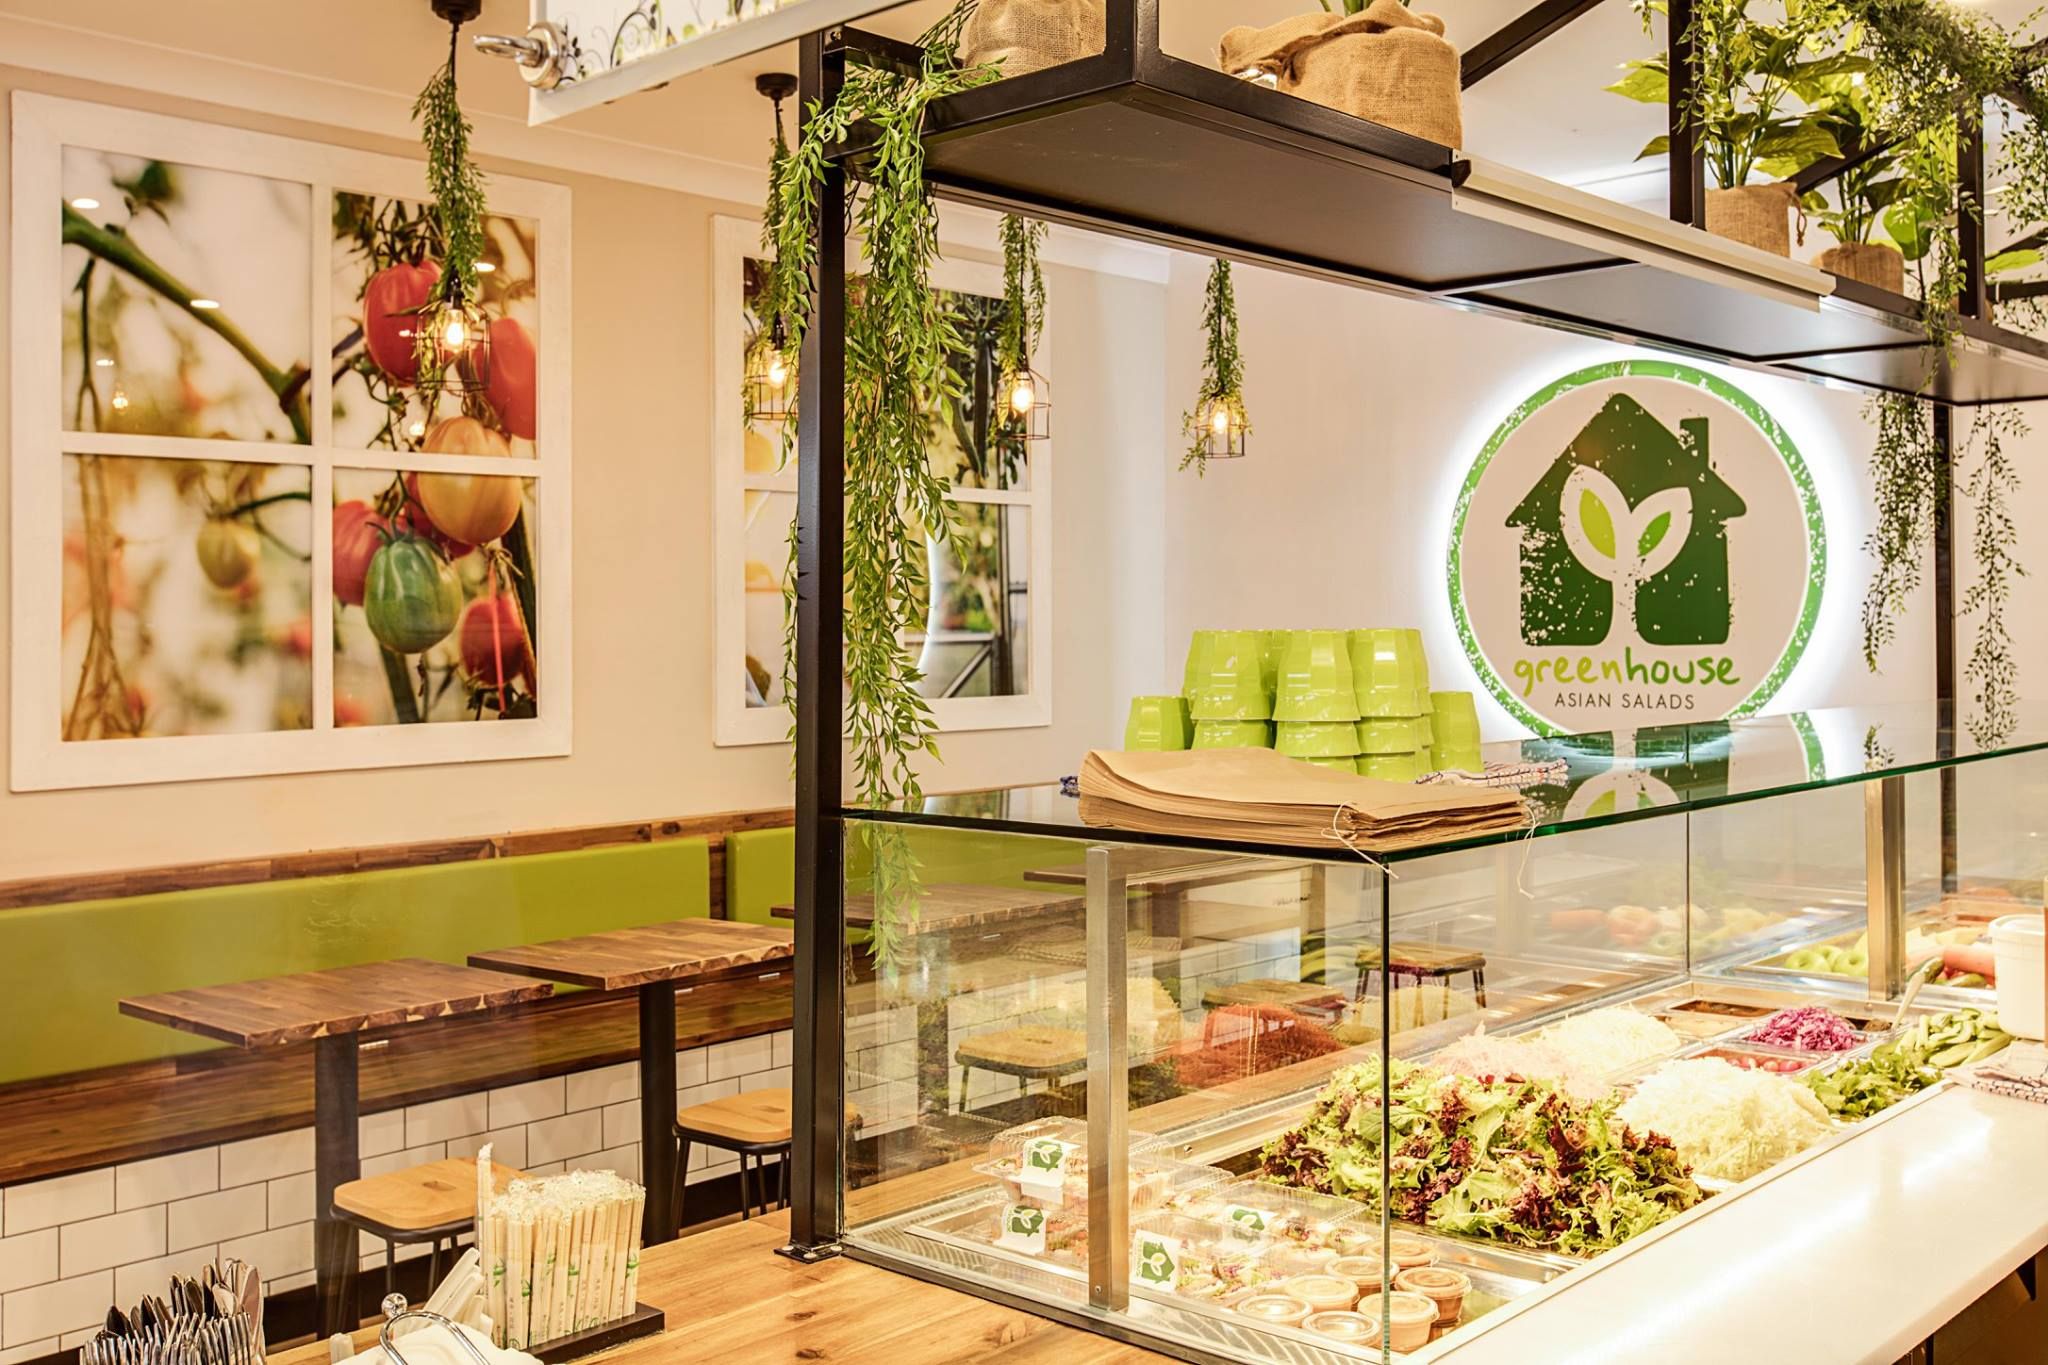 Chef-backed salad franchise Greenhouse Asian Salads hits the market